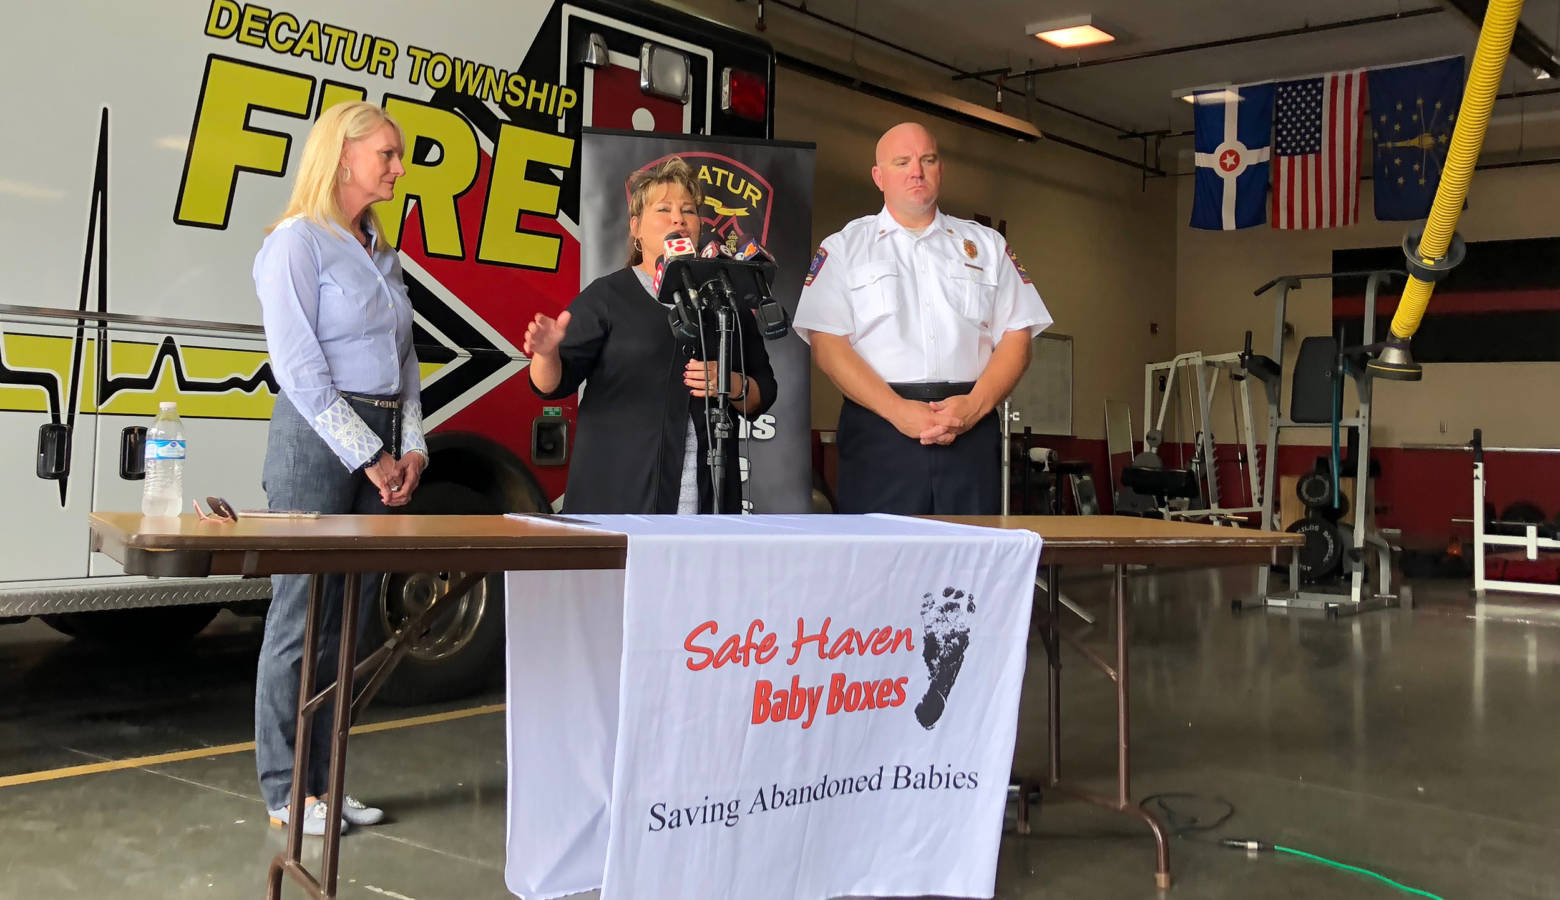 Monica Kelsey, founder of Safe Haven Baby Boxes, speaks at Decatur Township Fire Department. The station will become Indiana's third Baby Box location, though the installation has been delayed by a week or two. (Sarah Panfil/WFYI)